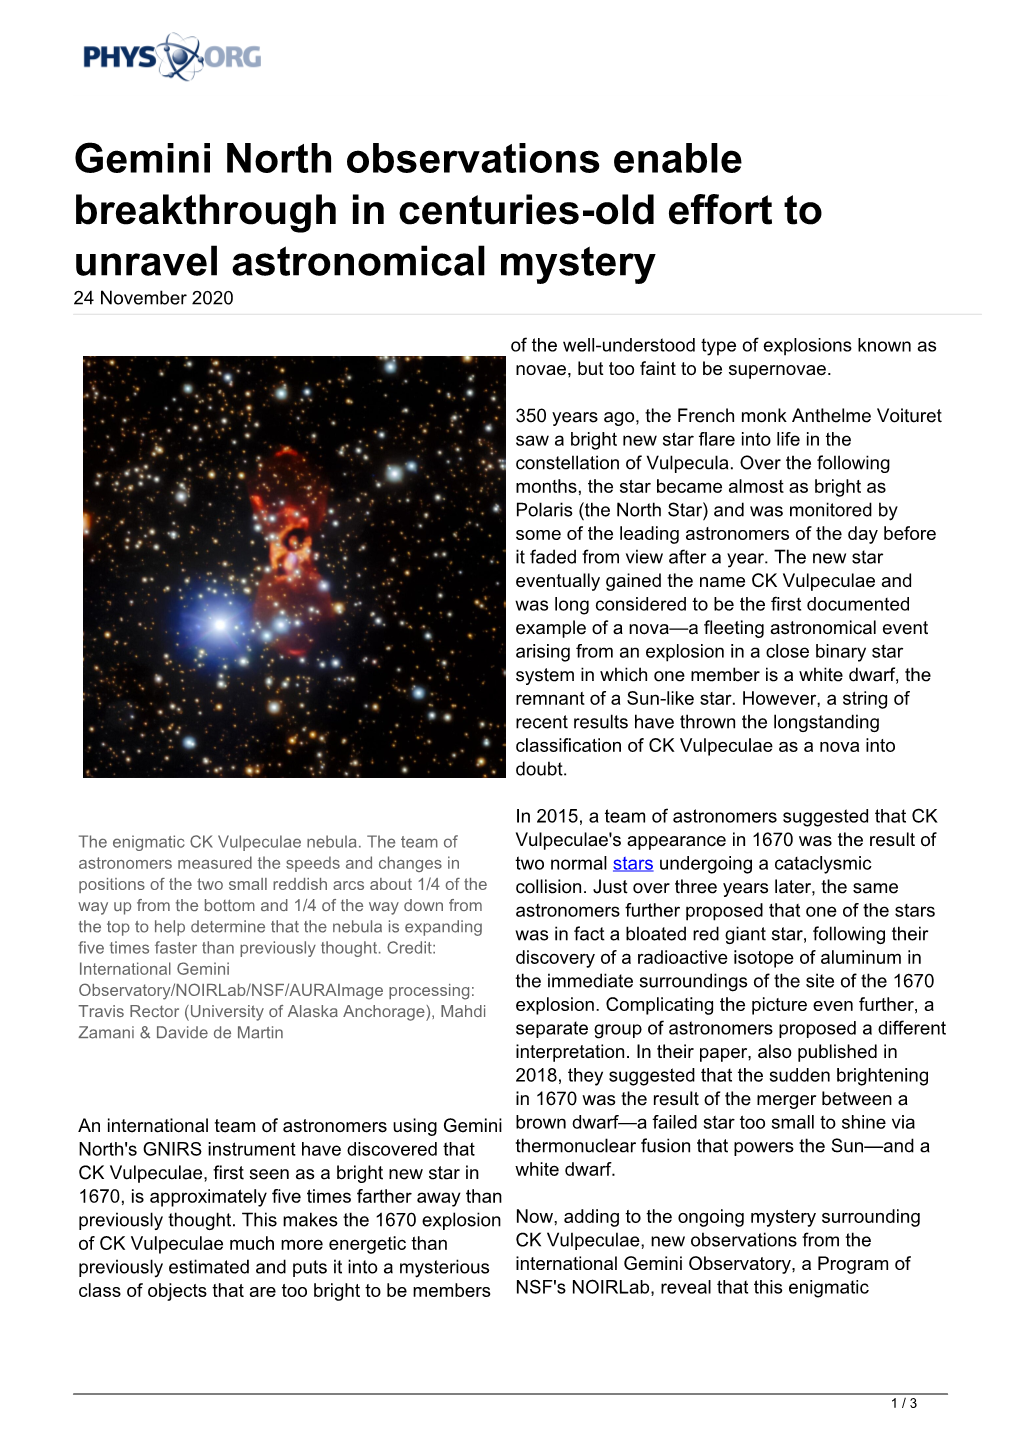 Gemini North Observations Enable Breakthrough in Centuries-Old Effort to Unravel Astronomical Mystery 24 November 2020